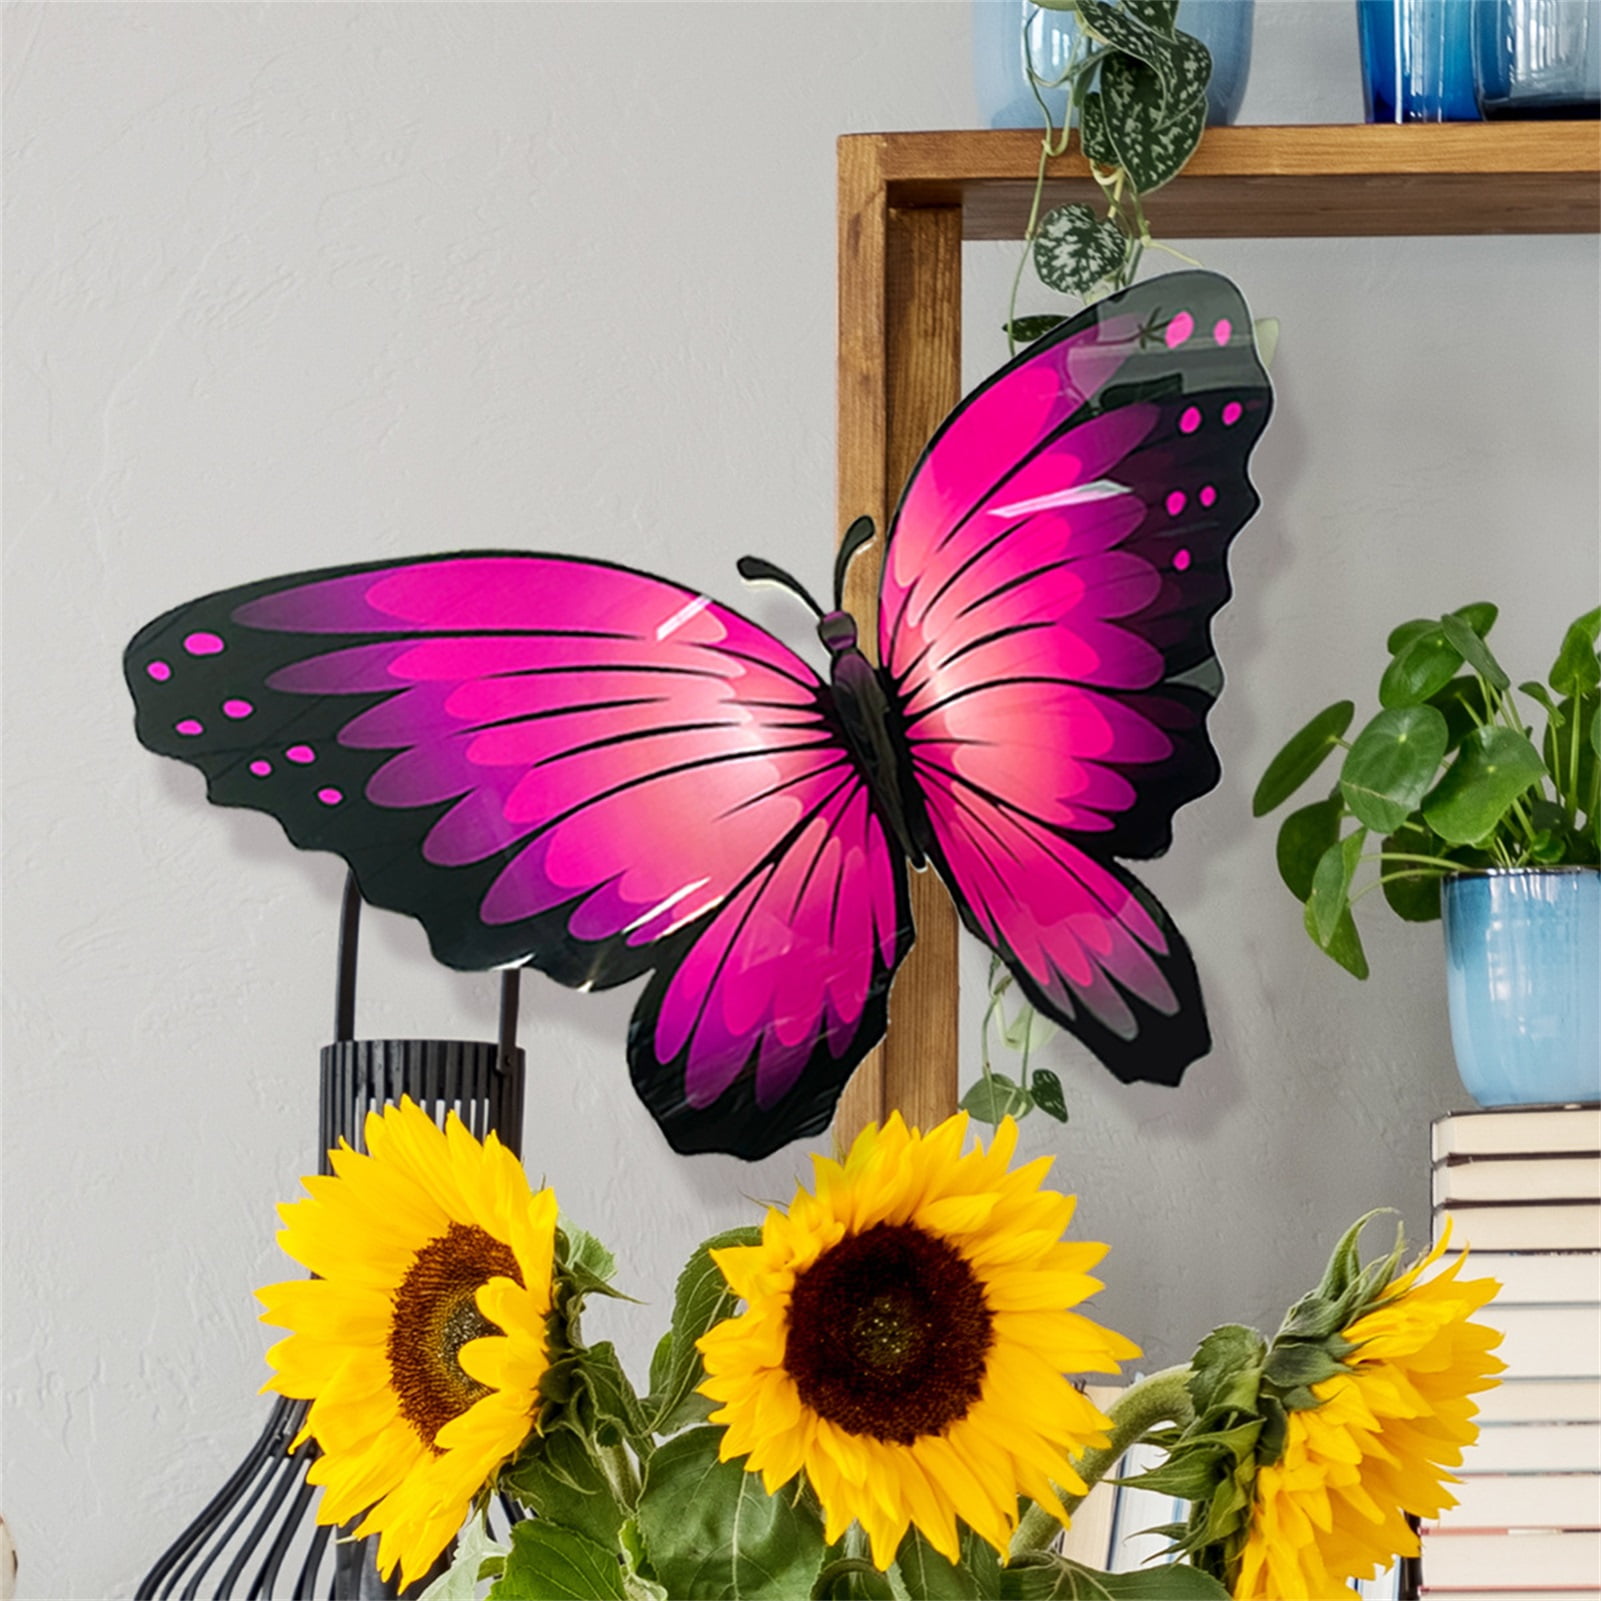 Travelwant Giant Butterfly Wall Stickers Decor,3D Large Butterflies Wall Magnetism Decals Removable DIY Home Art Decorations, Green